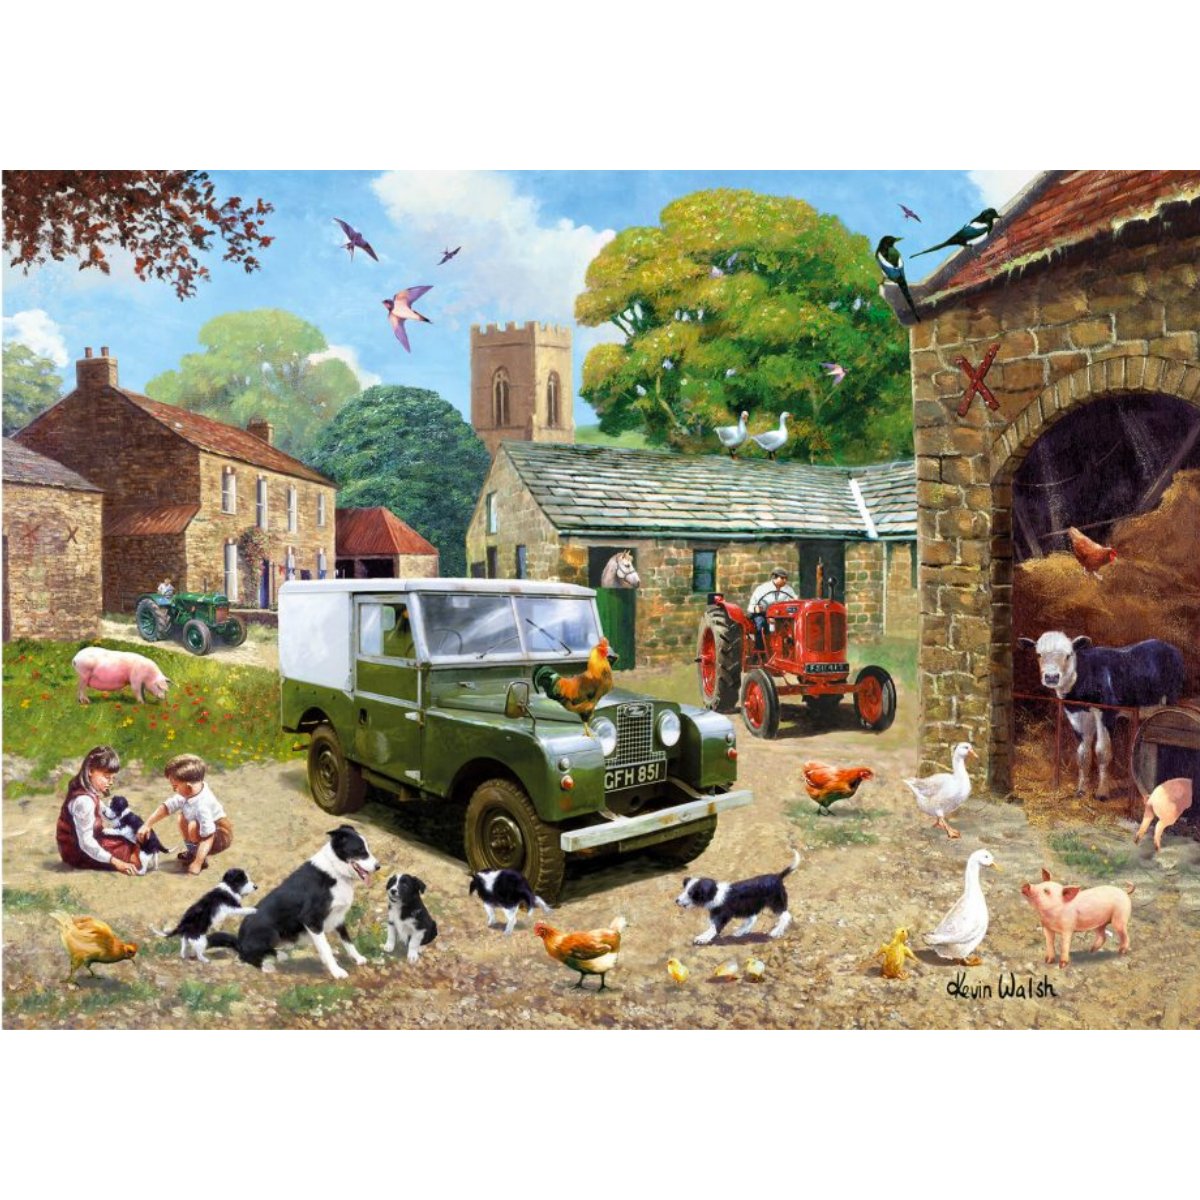 Kevin Walsh Nostalgia Down On The Farm Jigsaw Puzzle (1000 Pieces)